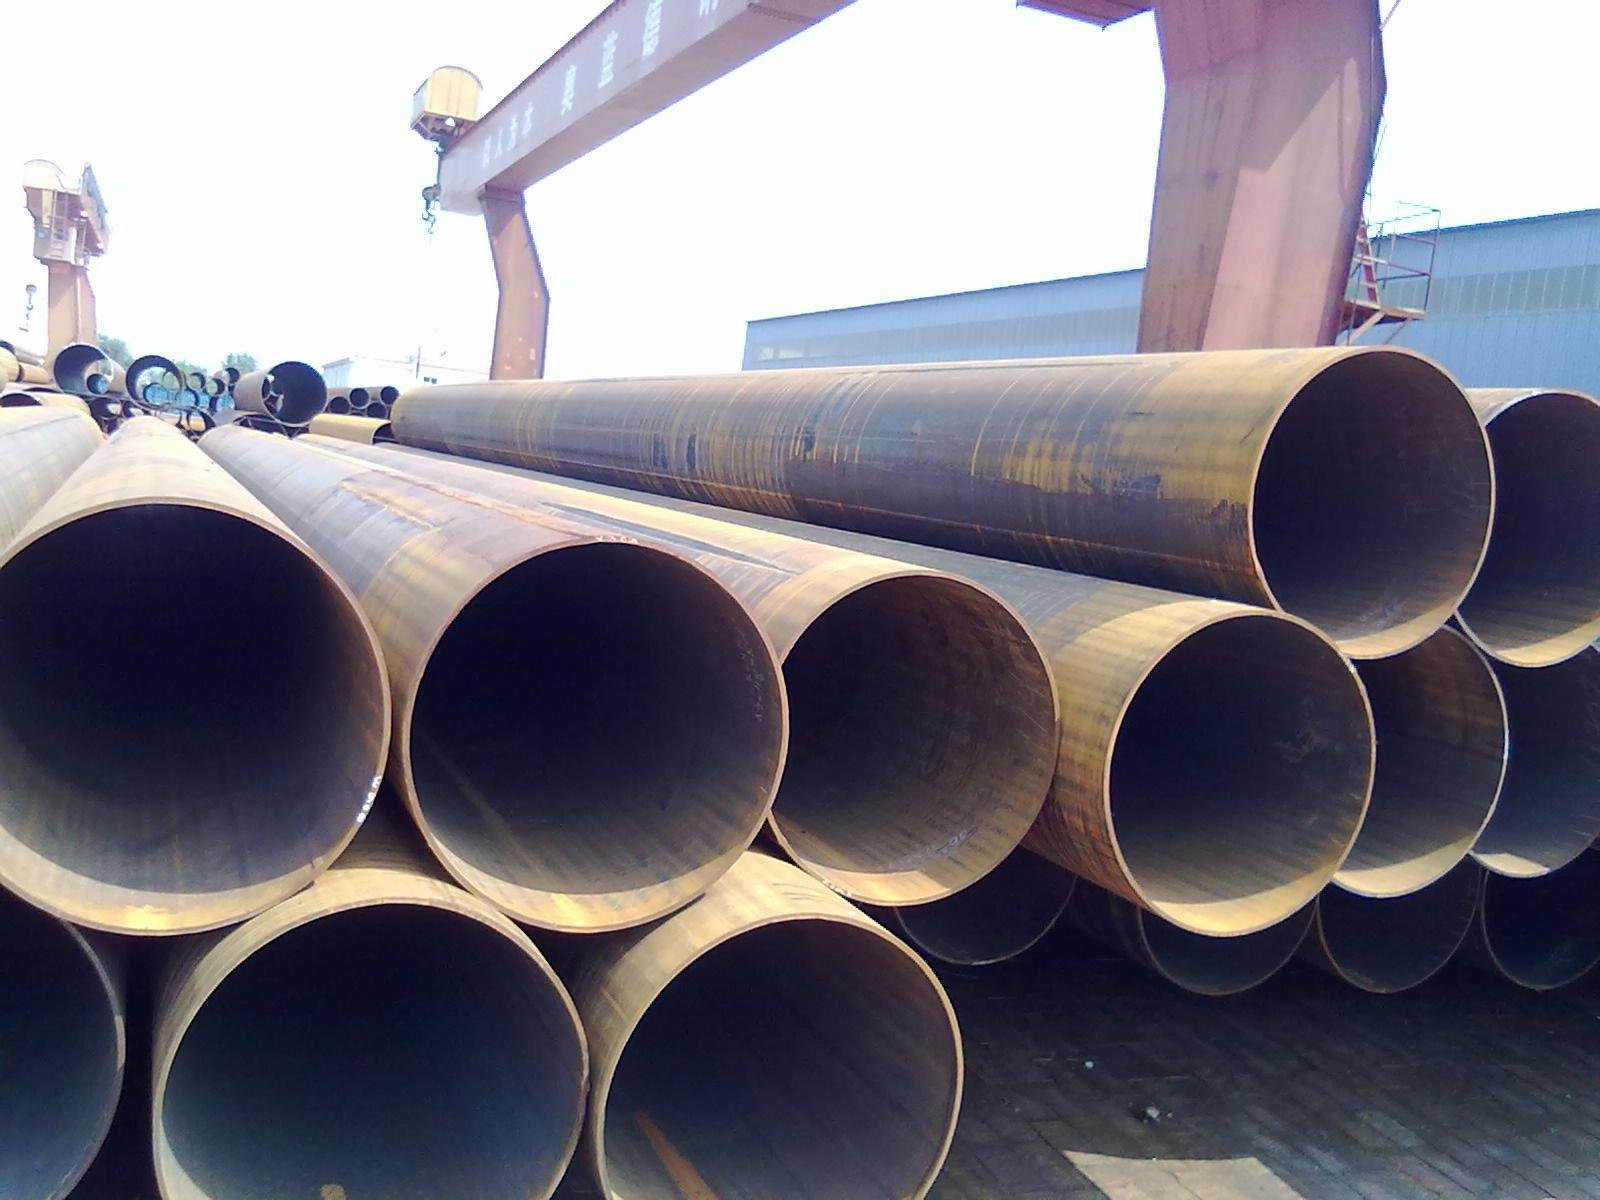 Astm A572 Gr.50 Welded Erw Carbon Steel Pipe